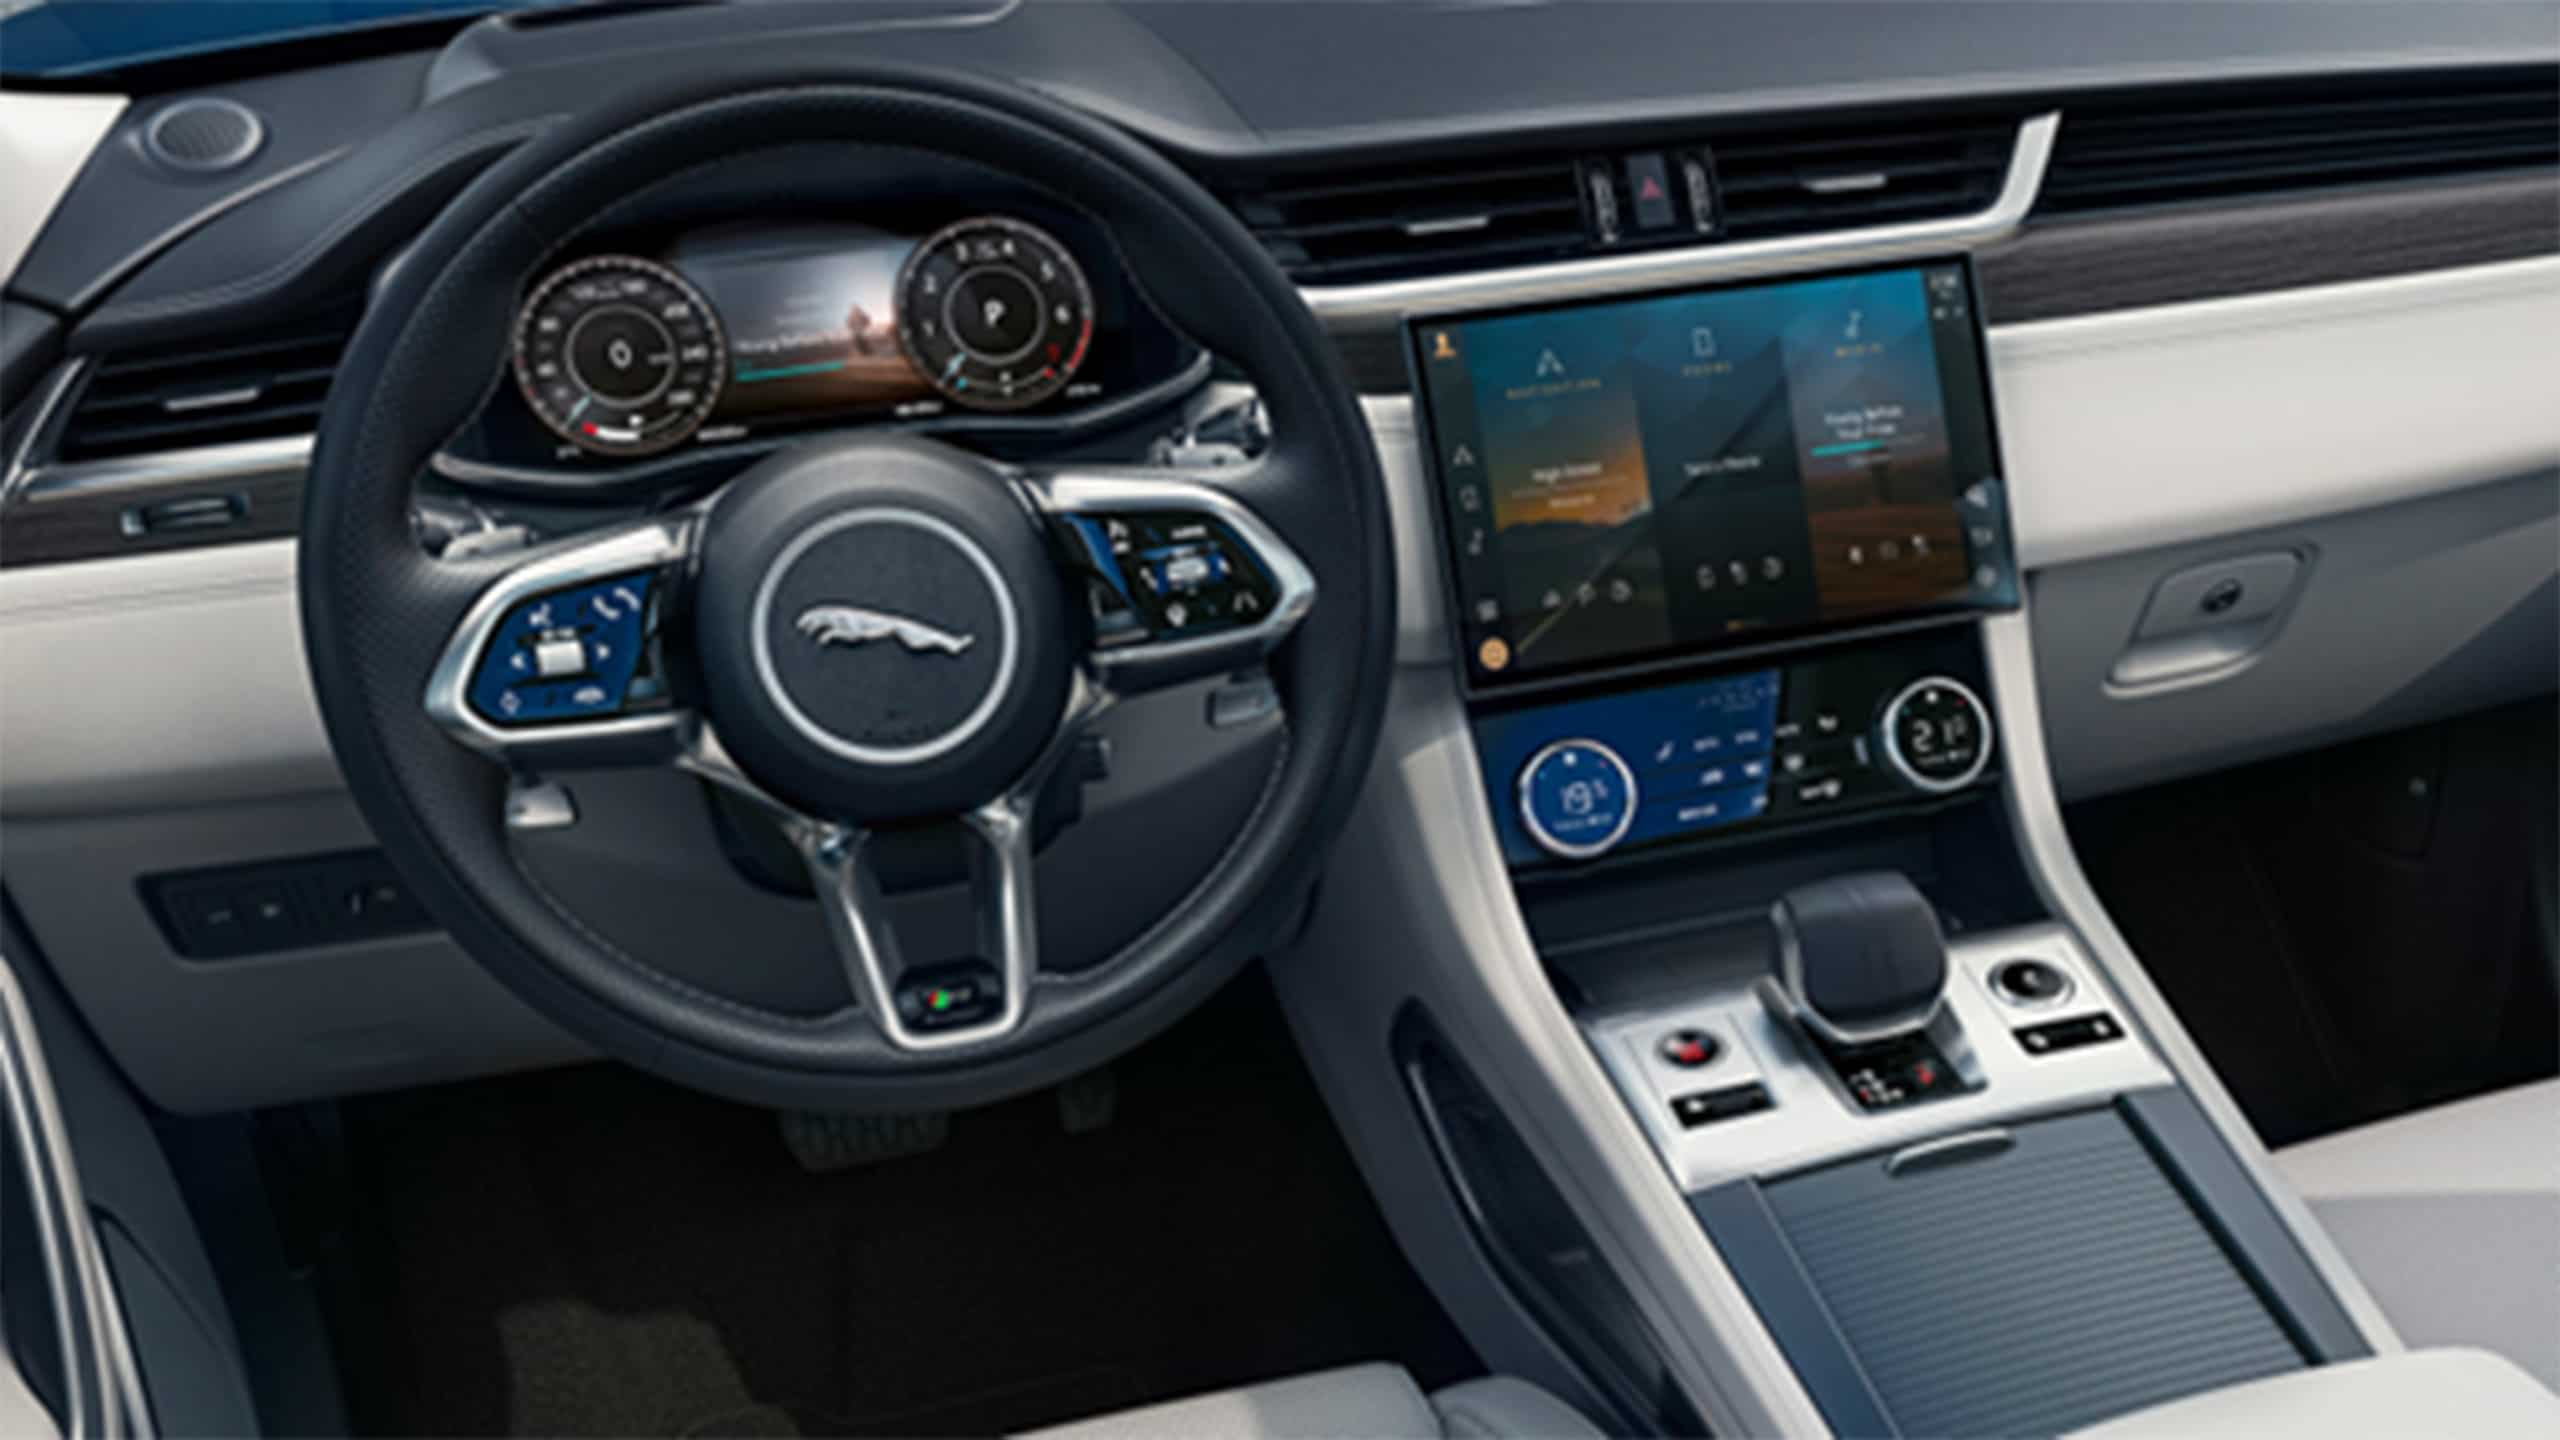 F-PACE Standard InControl OS 2.0 Infotainment System